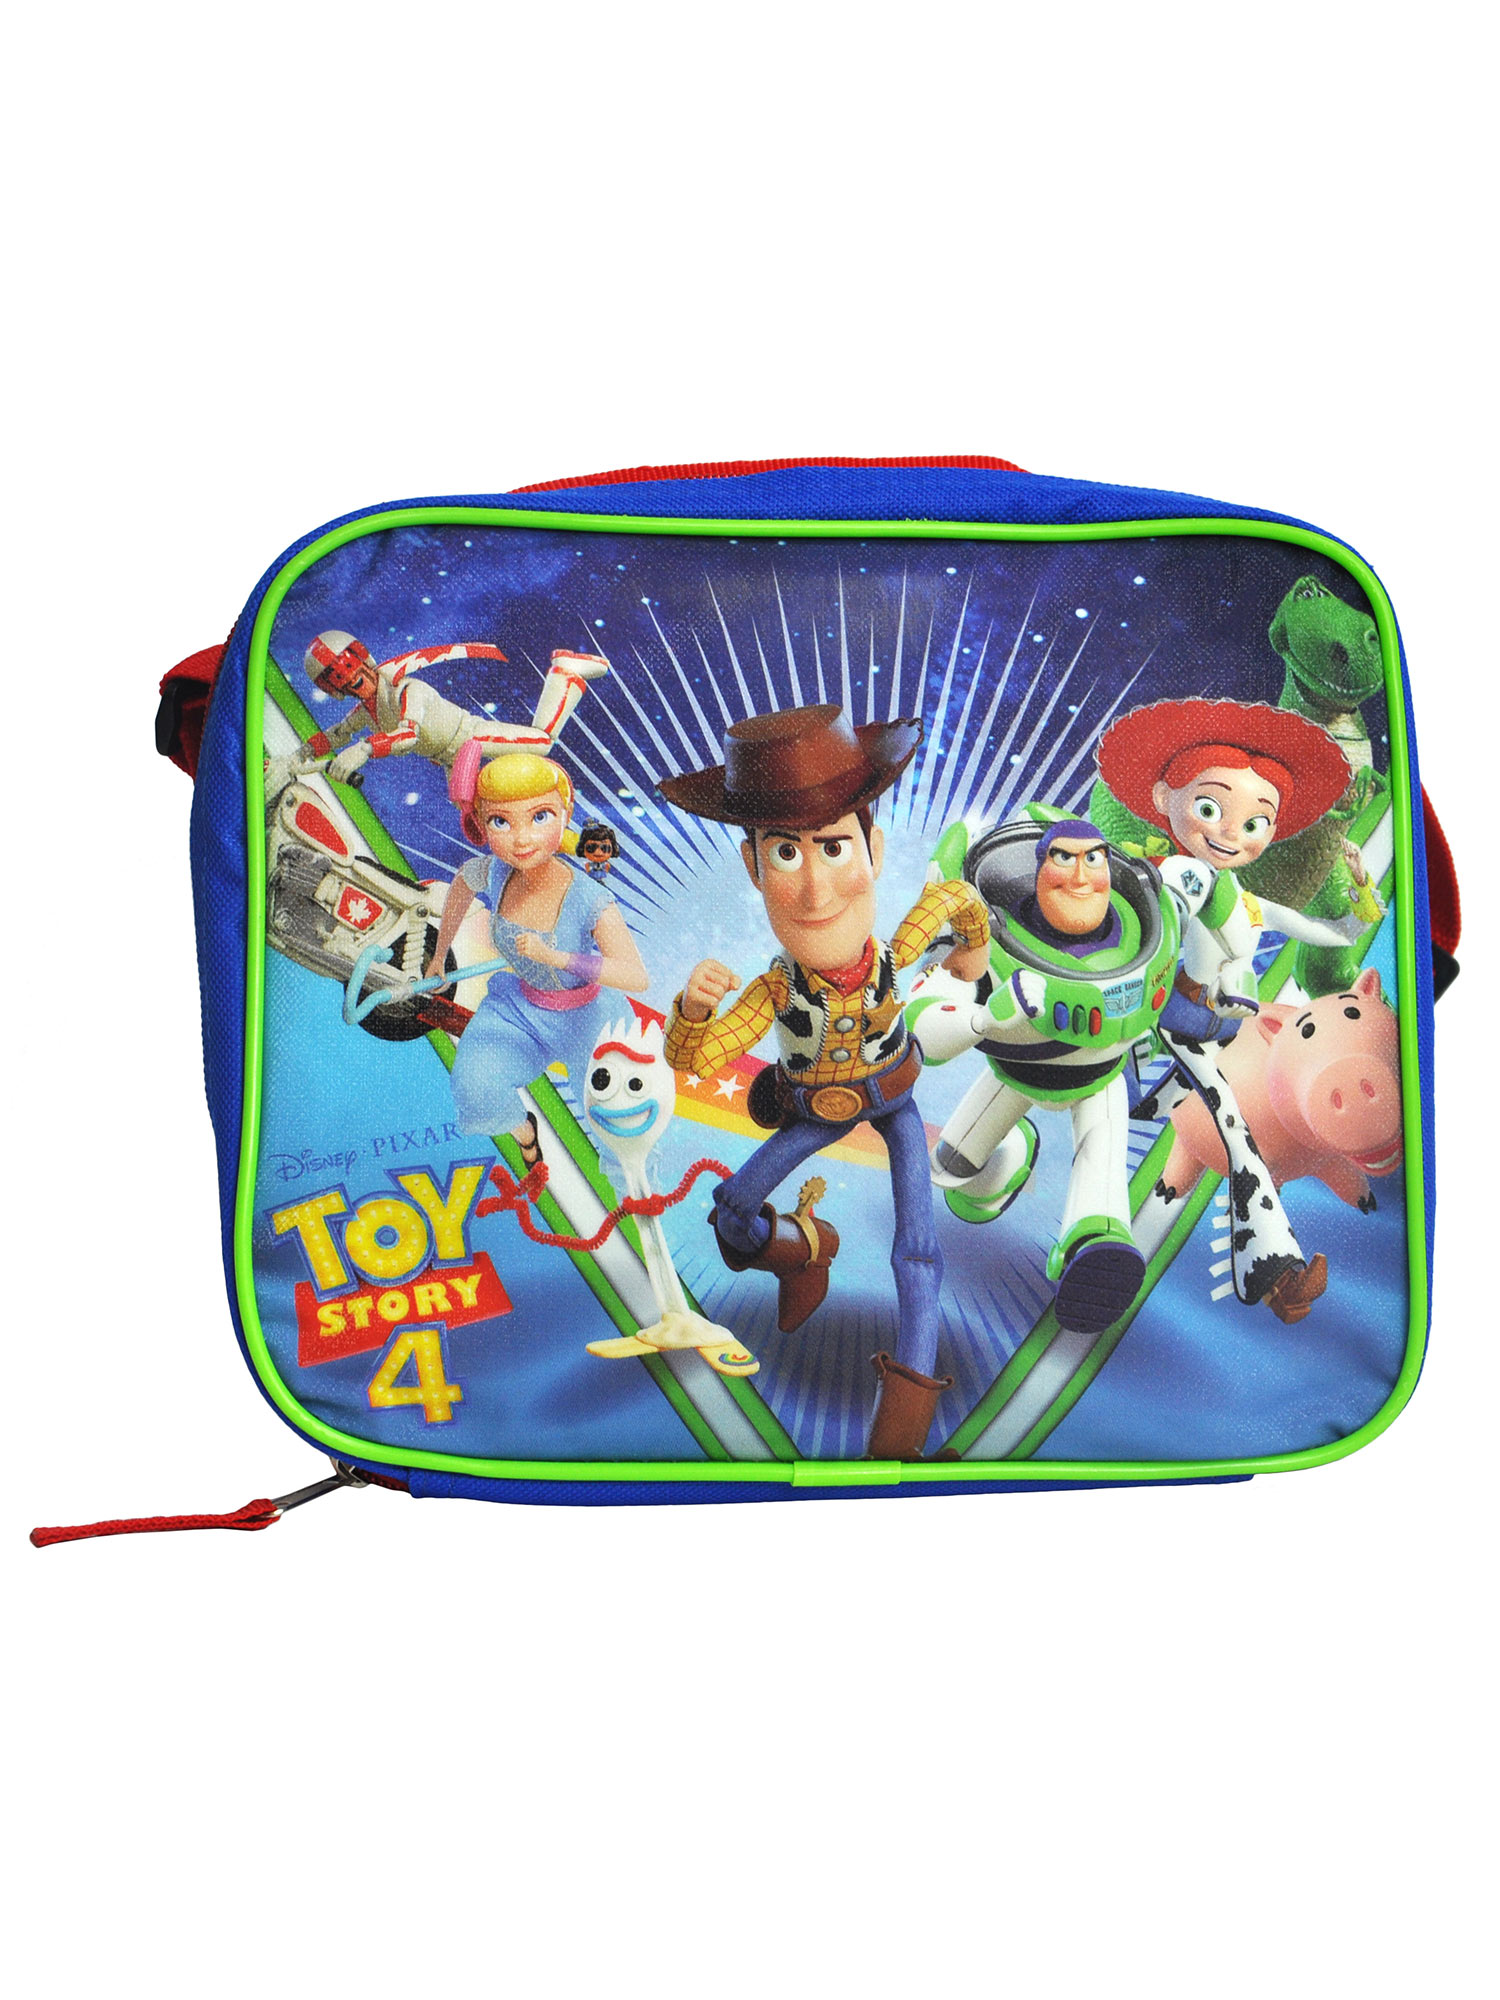 Toy Story 4 Insulated Lunch Bag Shoulder Strap Bo Peep Forky Woody - image 1 of 4